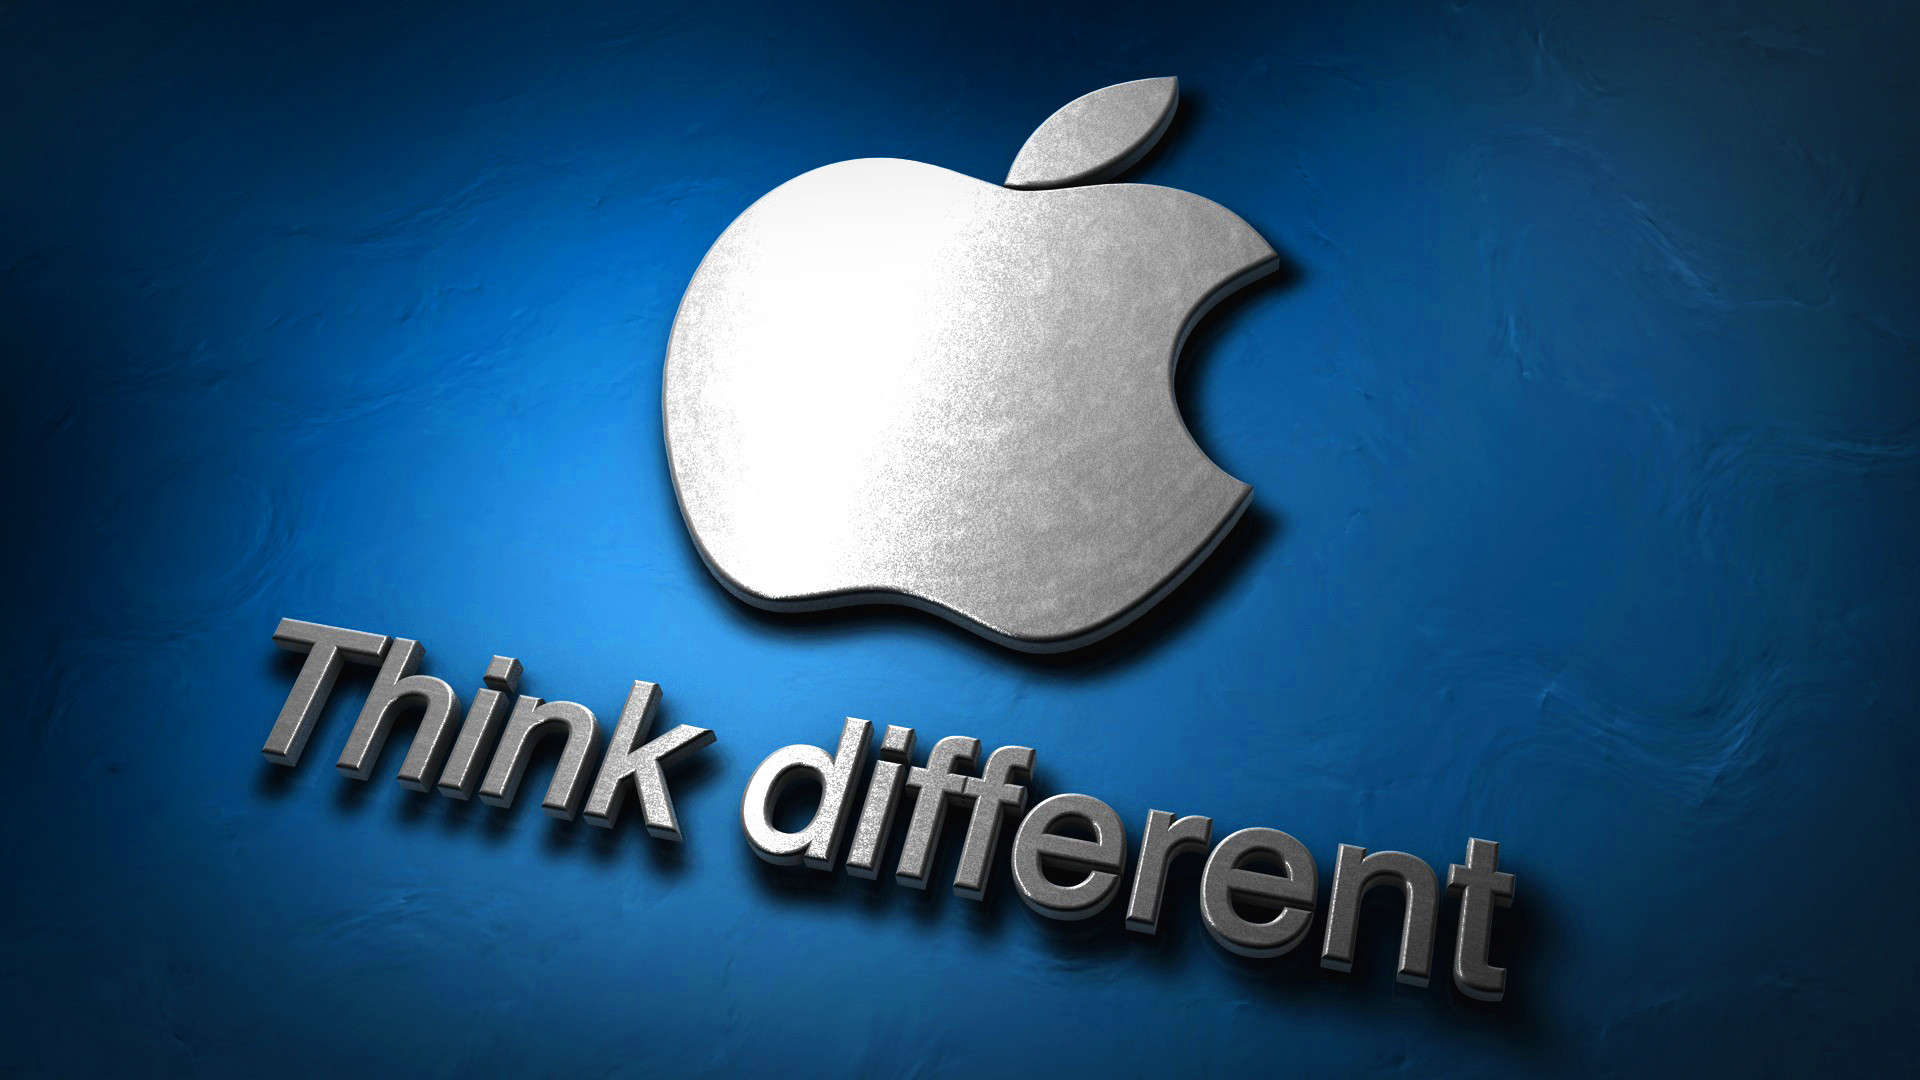 1920x1080 Get free high quality HD wallpapers apple think different wallpaper hd